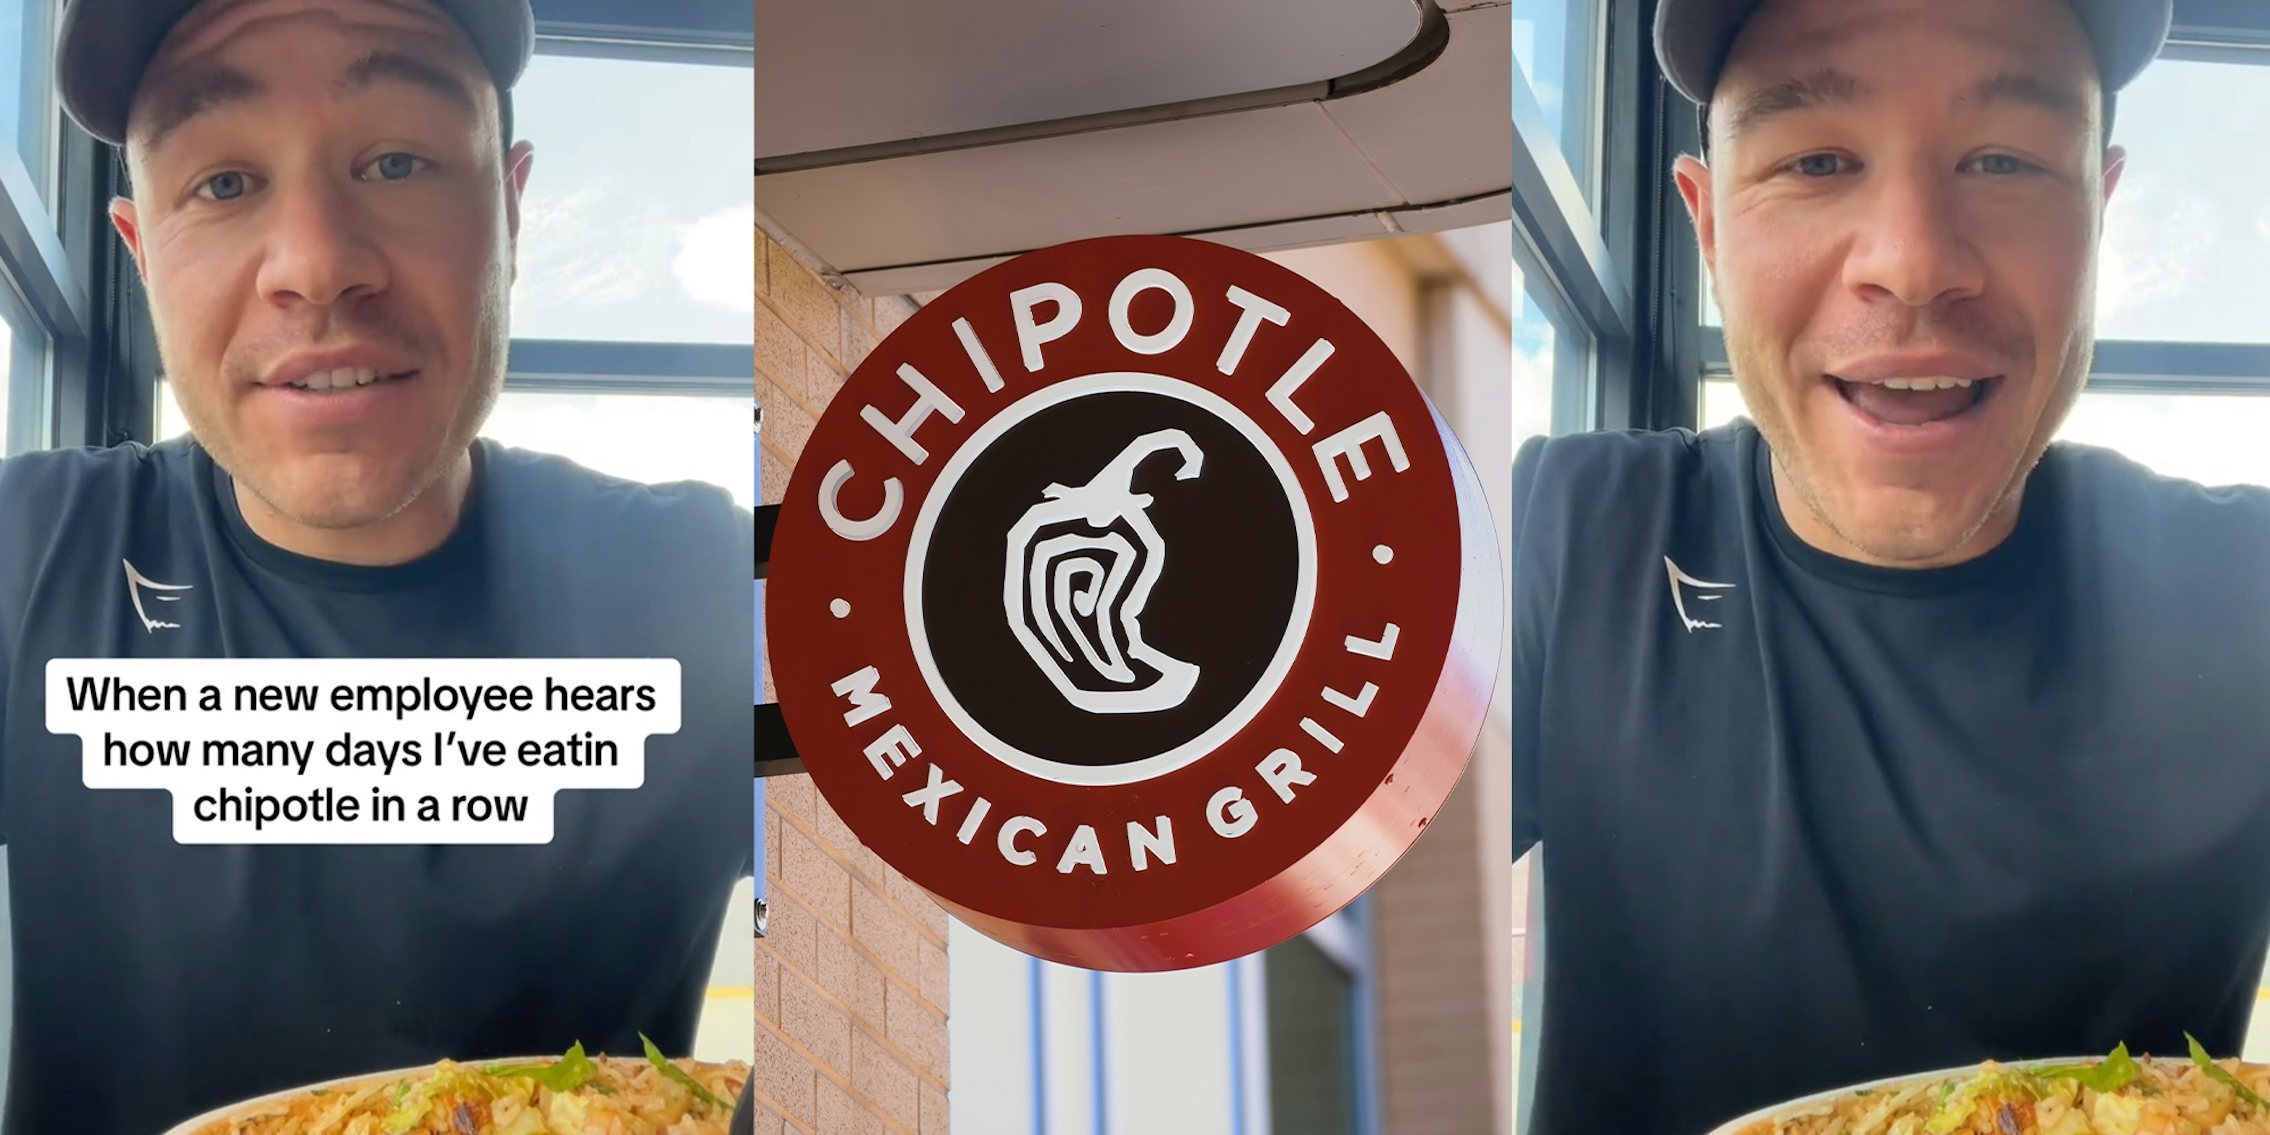 Chipotle customer tells new employee that he's eaten there for 624 days in a row